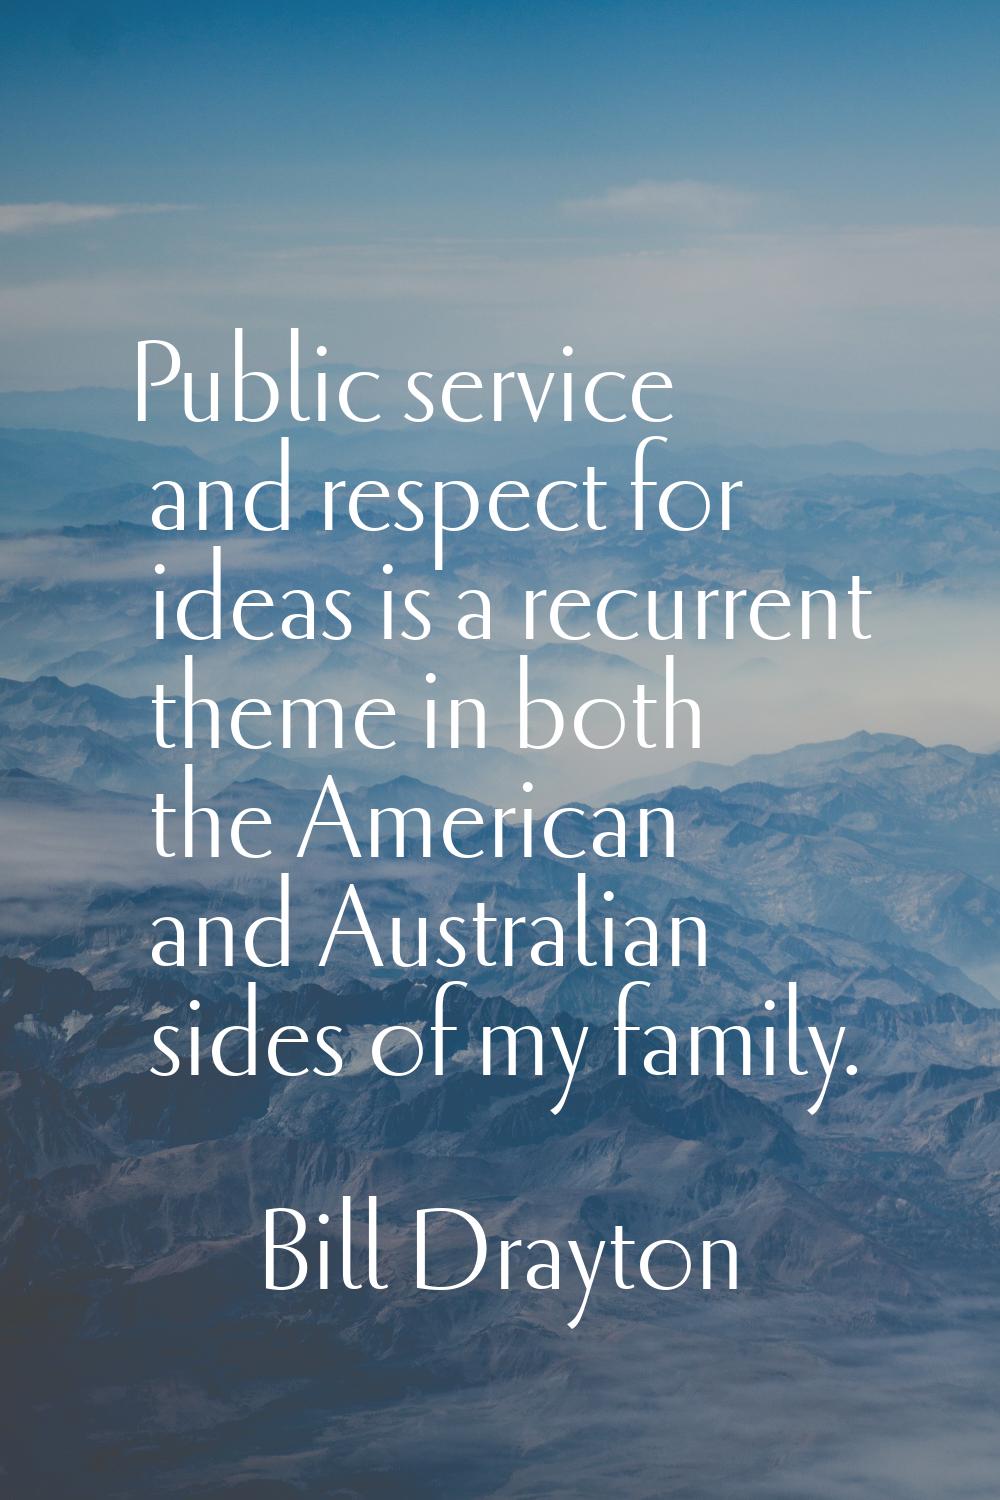 Public service and respect for ideas is a recurrent theme in both the American and Australian sides